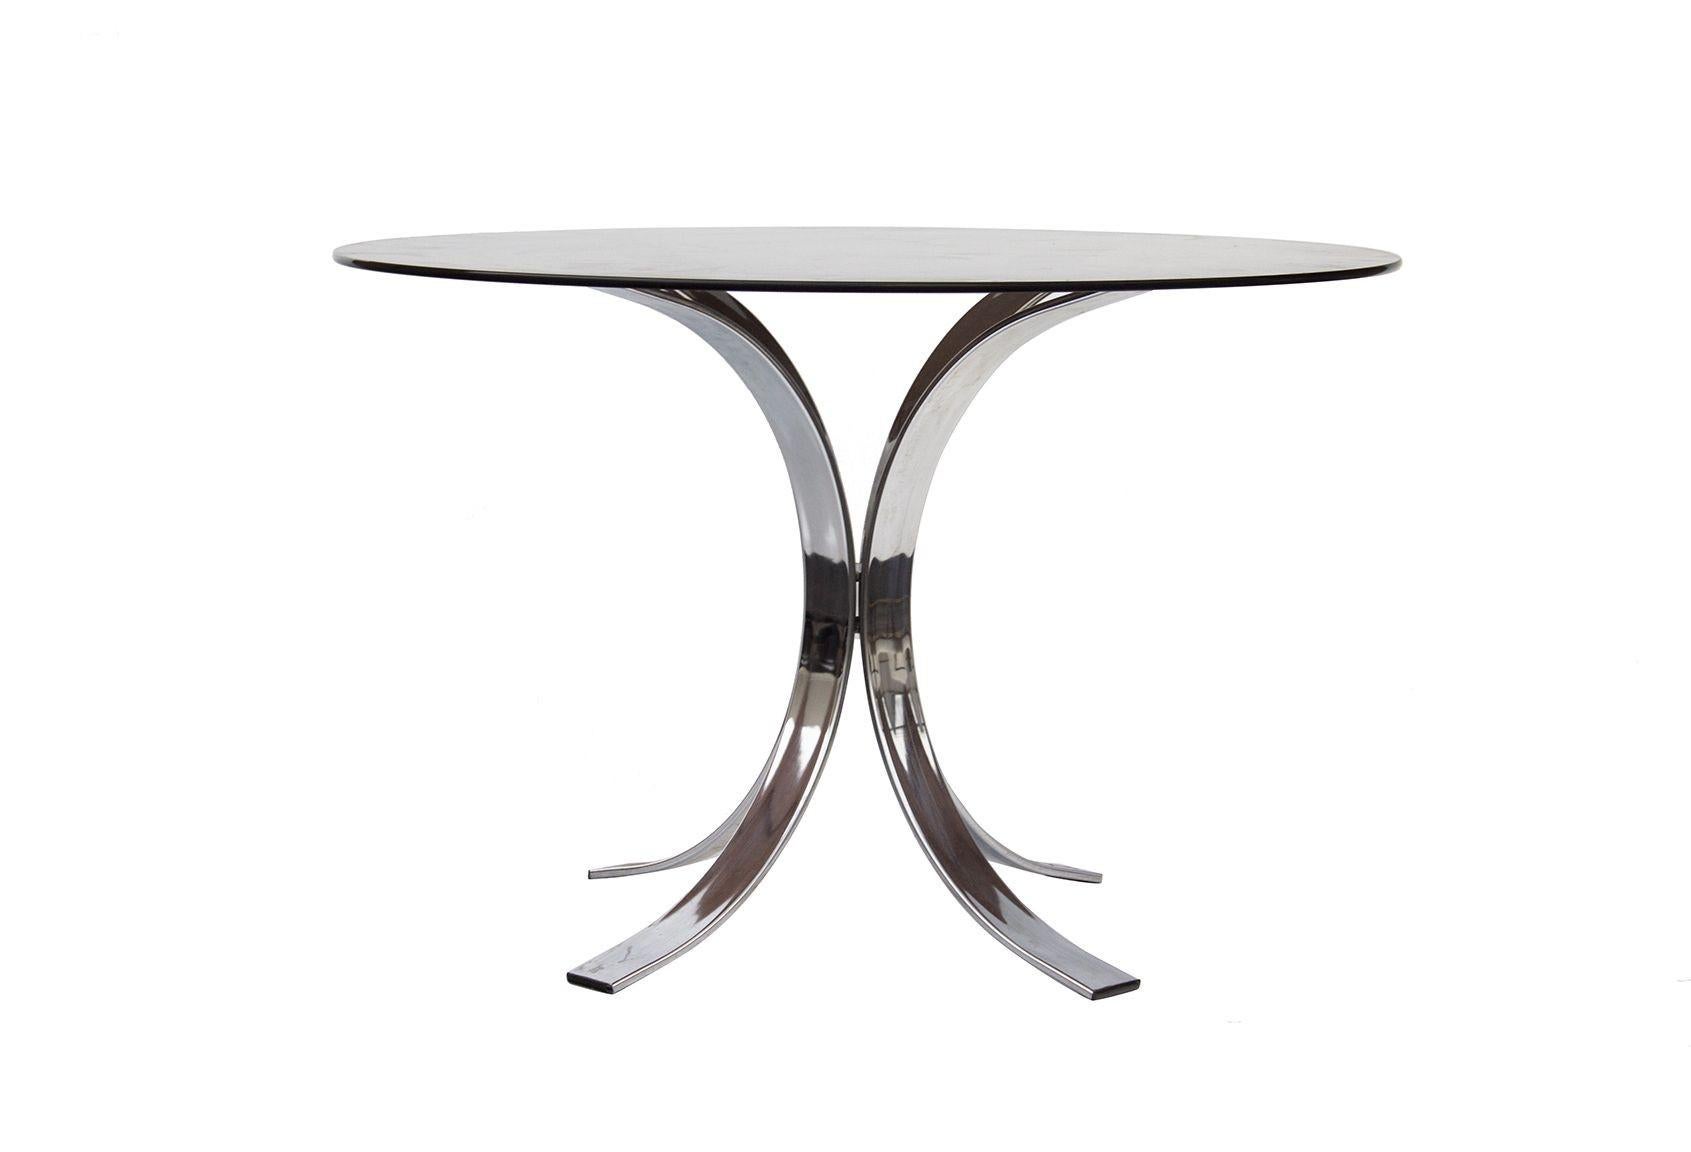 USA, 1970s
 
Chrome and glass dining table designed by Osvaldo Borsani for Stow & Davis. 
 
Condition notes: In very good vintage condition. Fine surface scratches to the smoked glass top. Fine marks to the base. Presents very well. 
